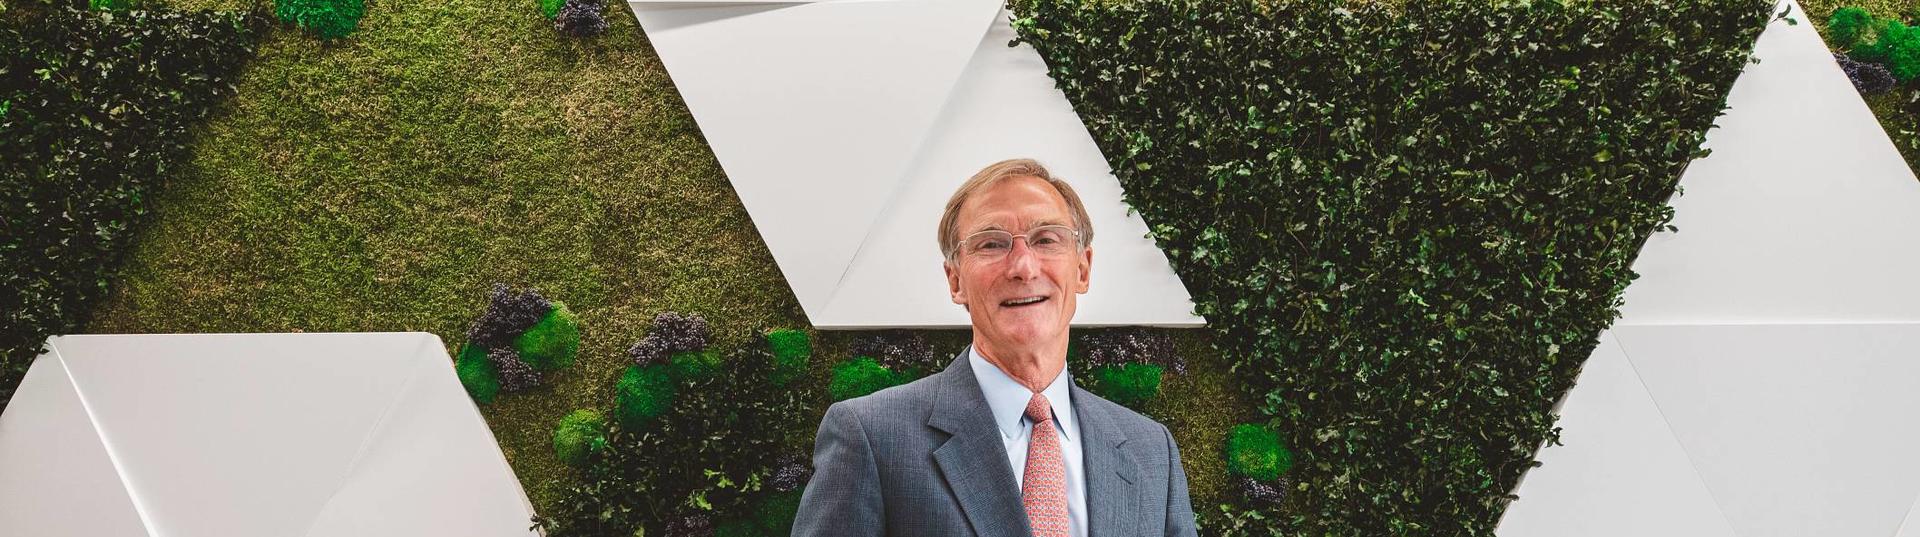 Roger Krone standing in front of a living wall at headquarters